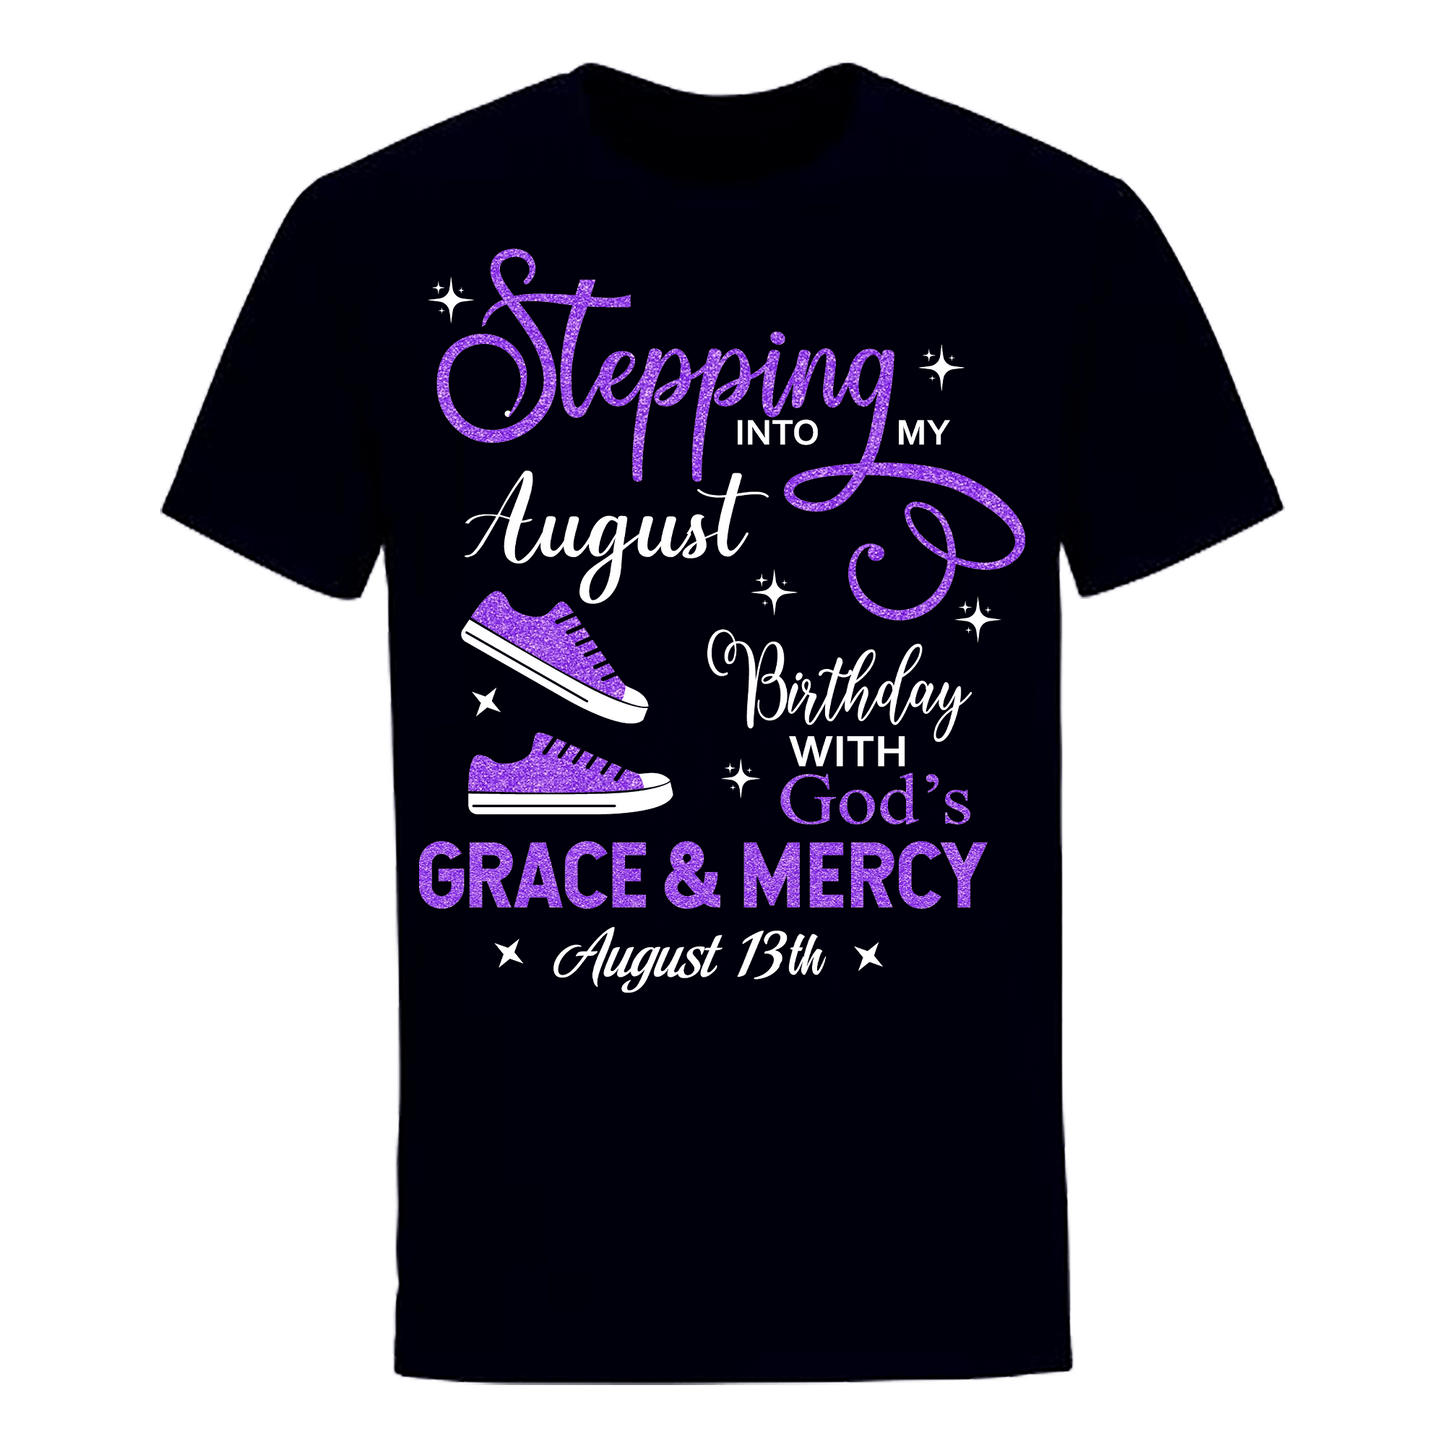 AUGUST 13 GRACE AND MERCY